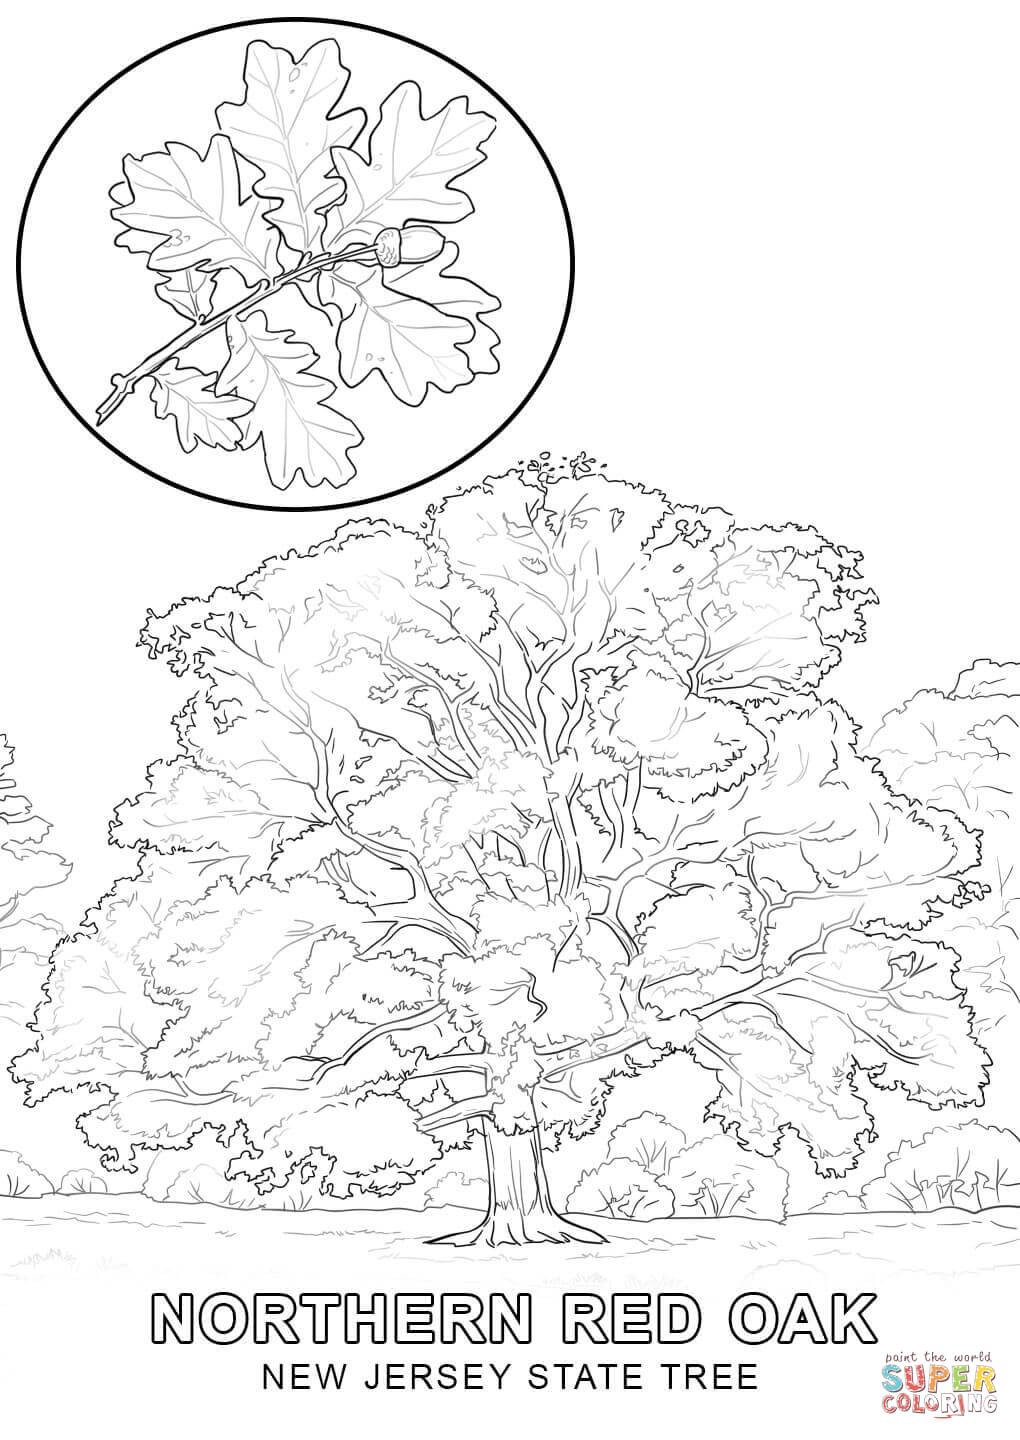 New Jersey State Tree coloring page | Free Printable Coloring Pages